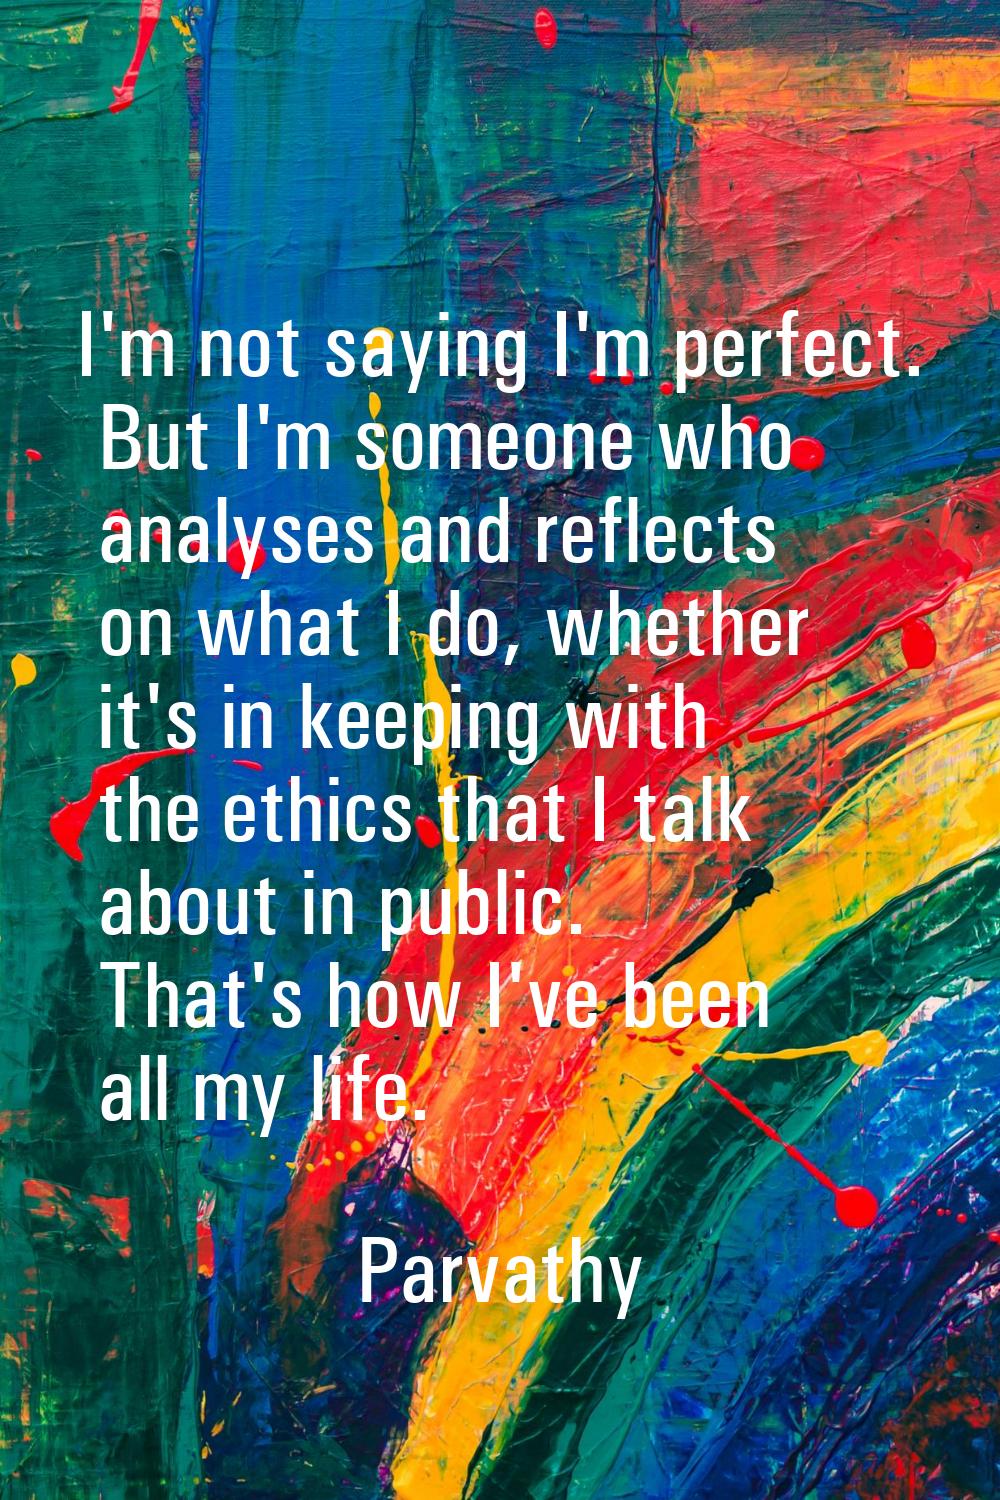 I'm not saying I'm perfect. But I'm someone who analyses and reflects on what I do, whether it's in